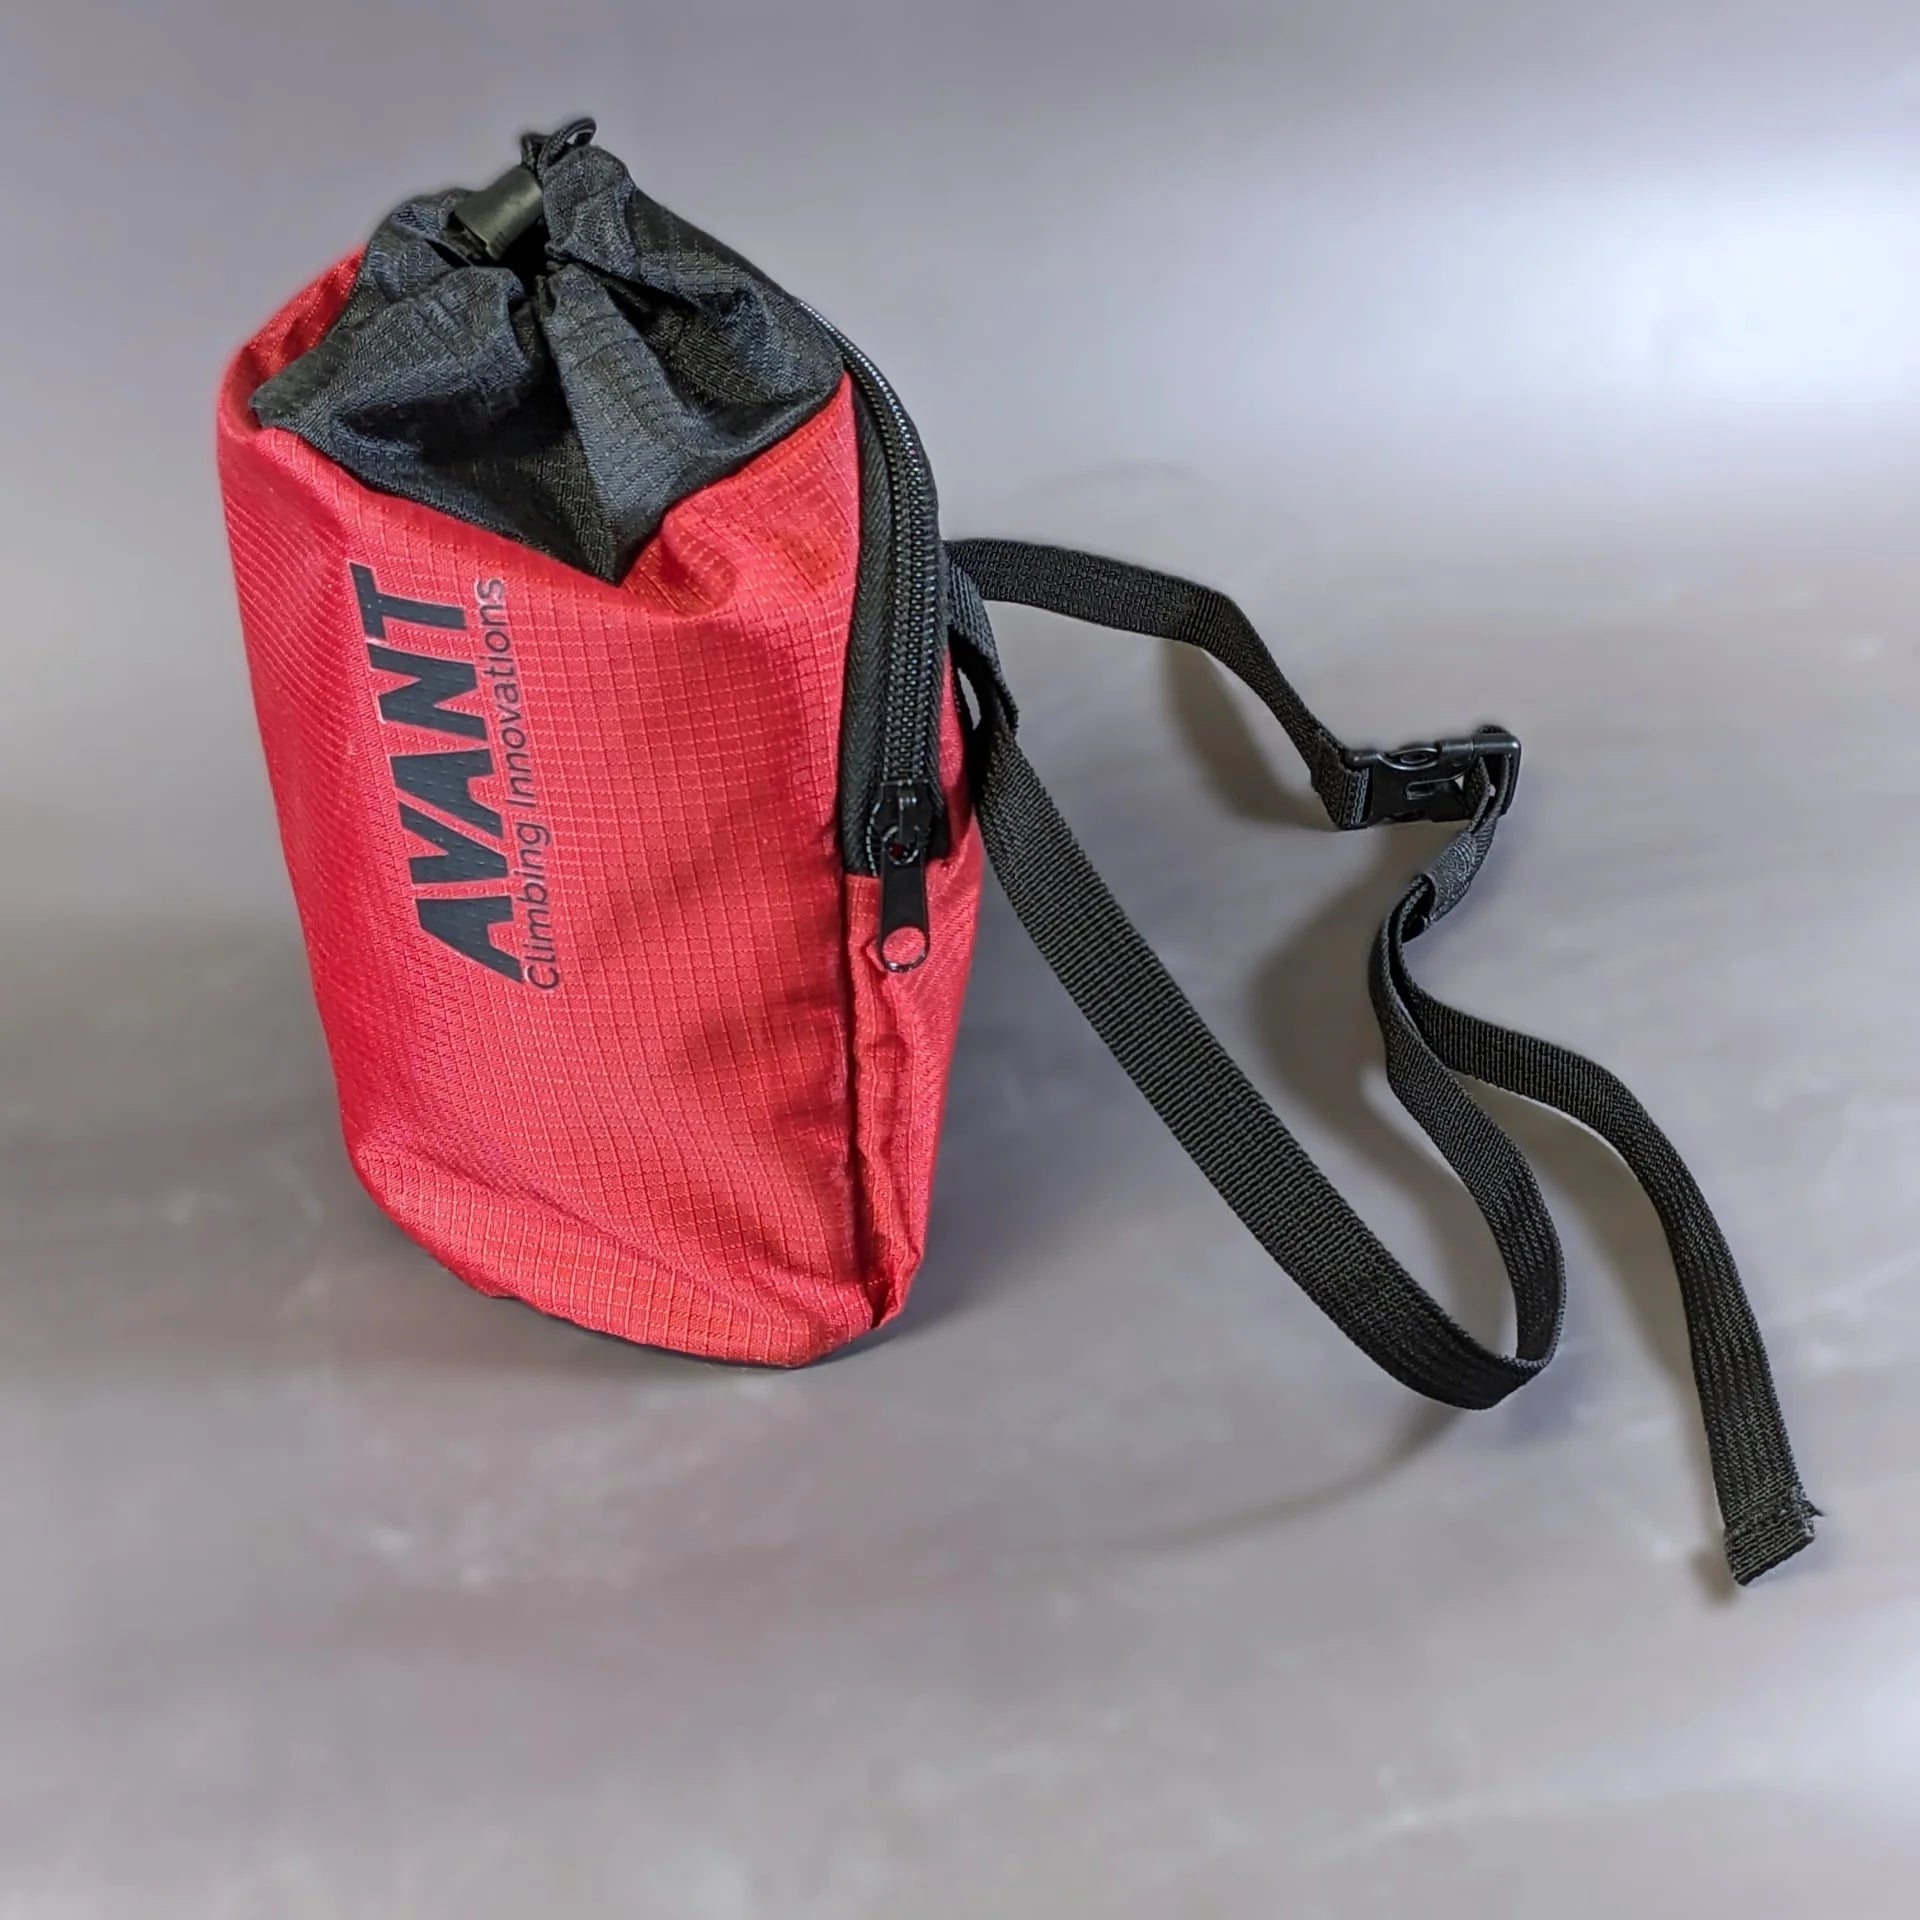 "Snack Pack" Multipitch Storage Pouch